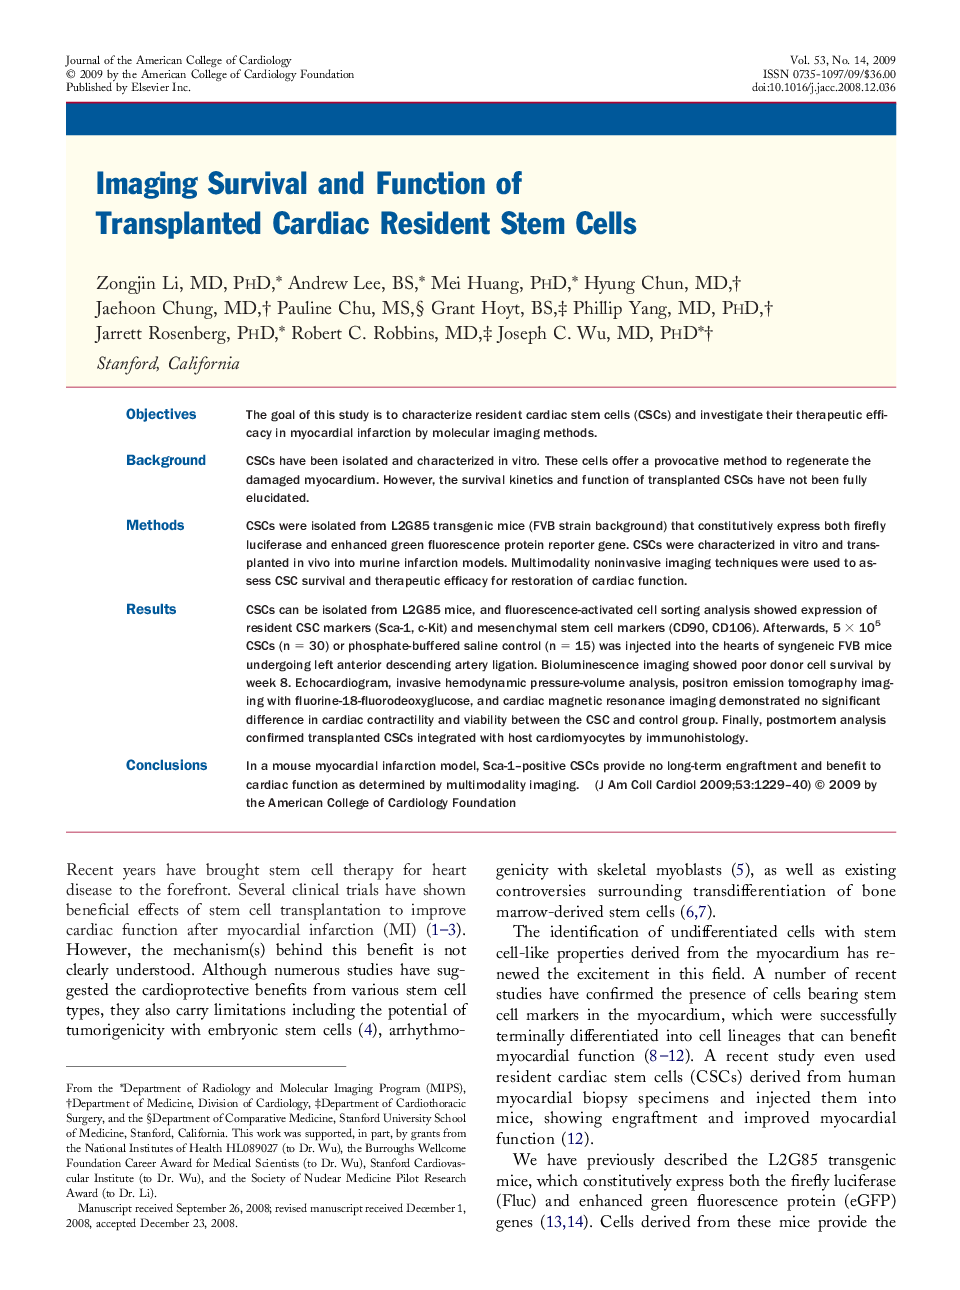 Imaging Survival and Function of Transplanted Cardiac Resident Stem Cells 